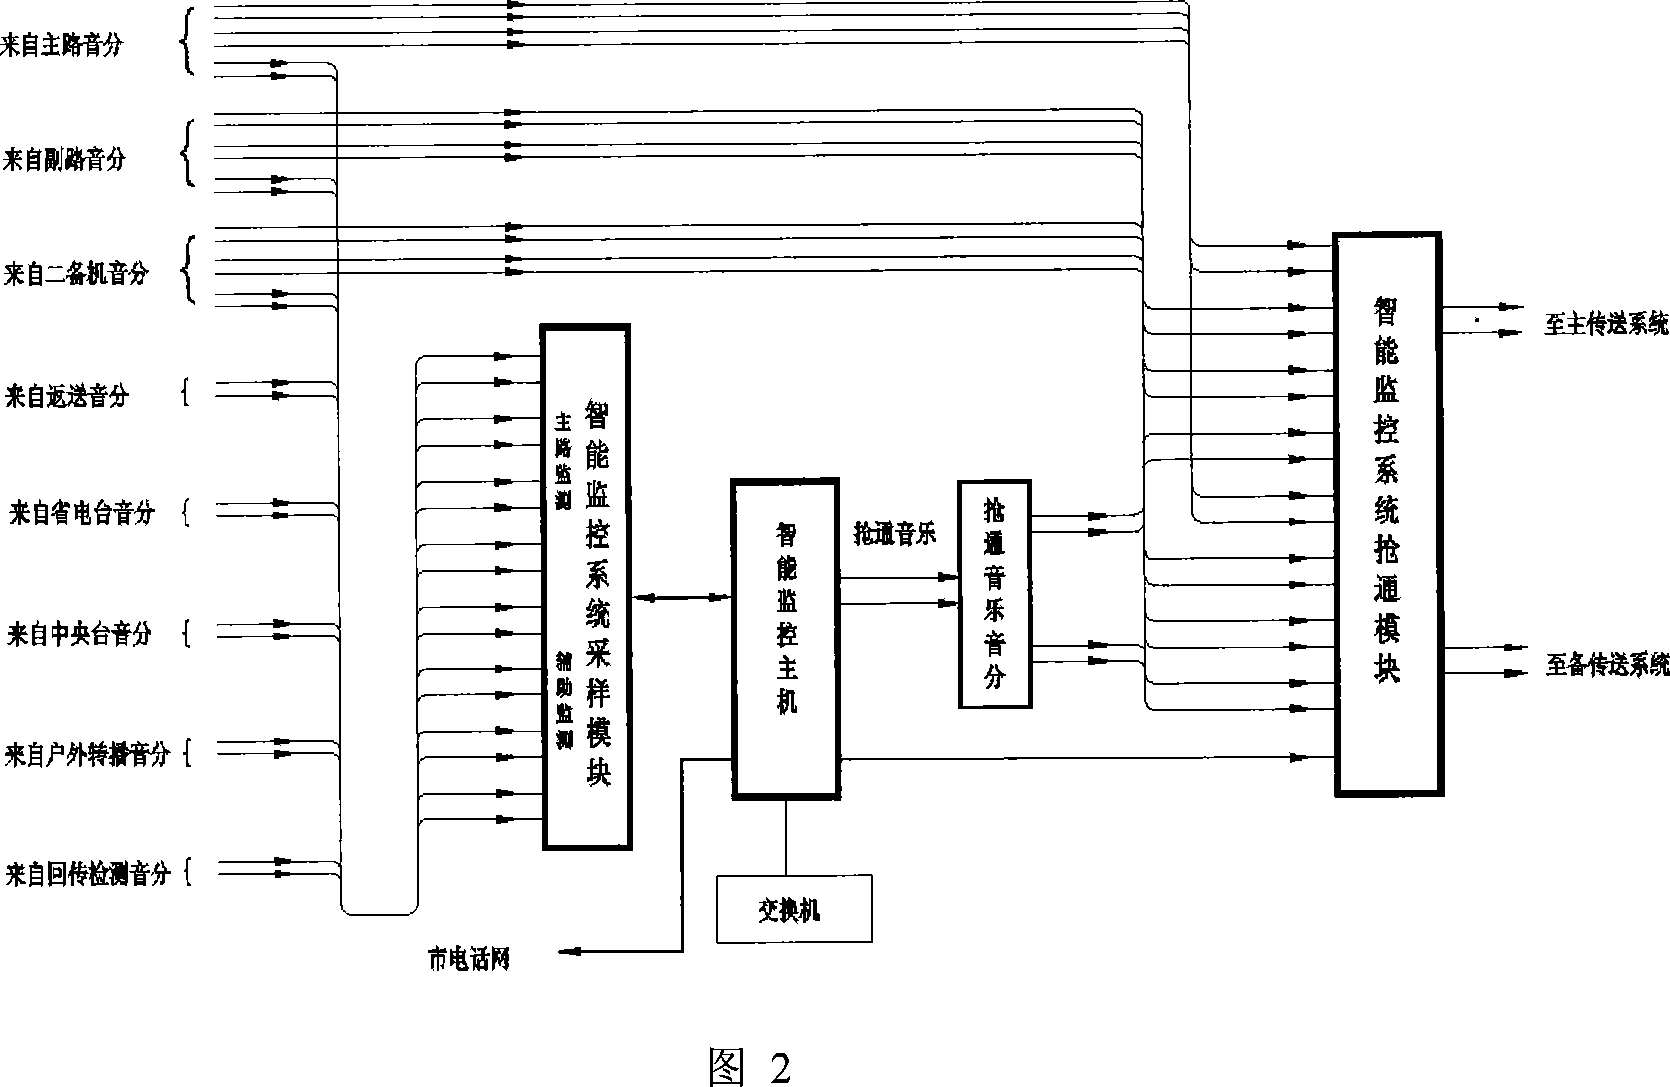 Broadcasting intelligent monitoring system and method